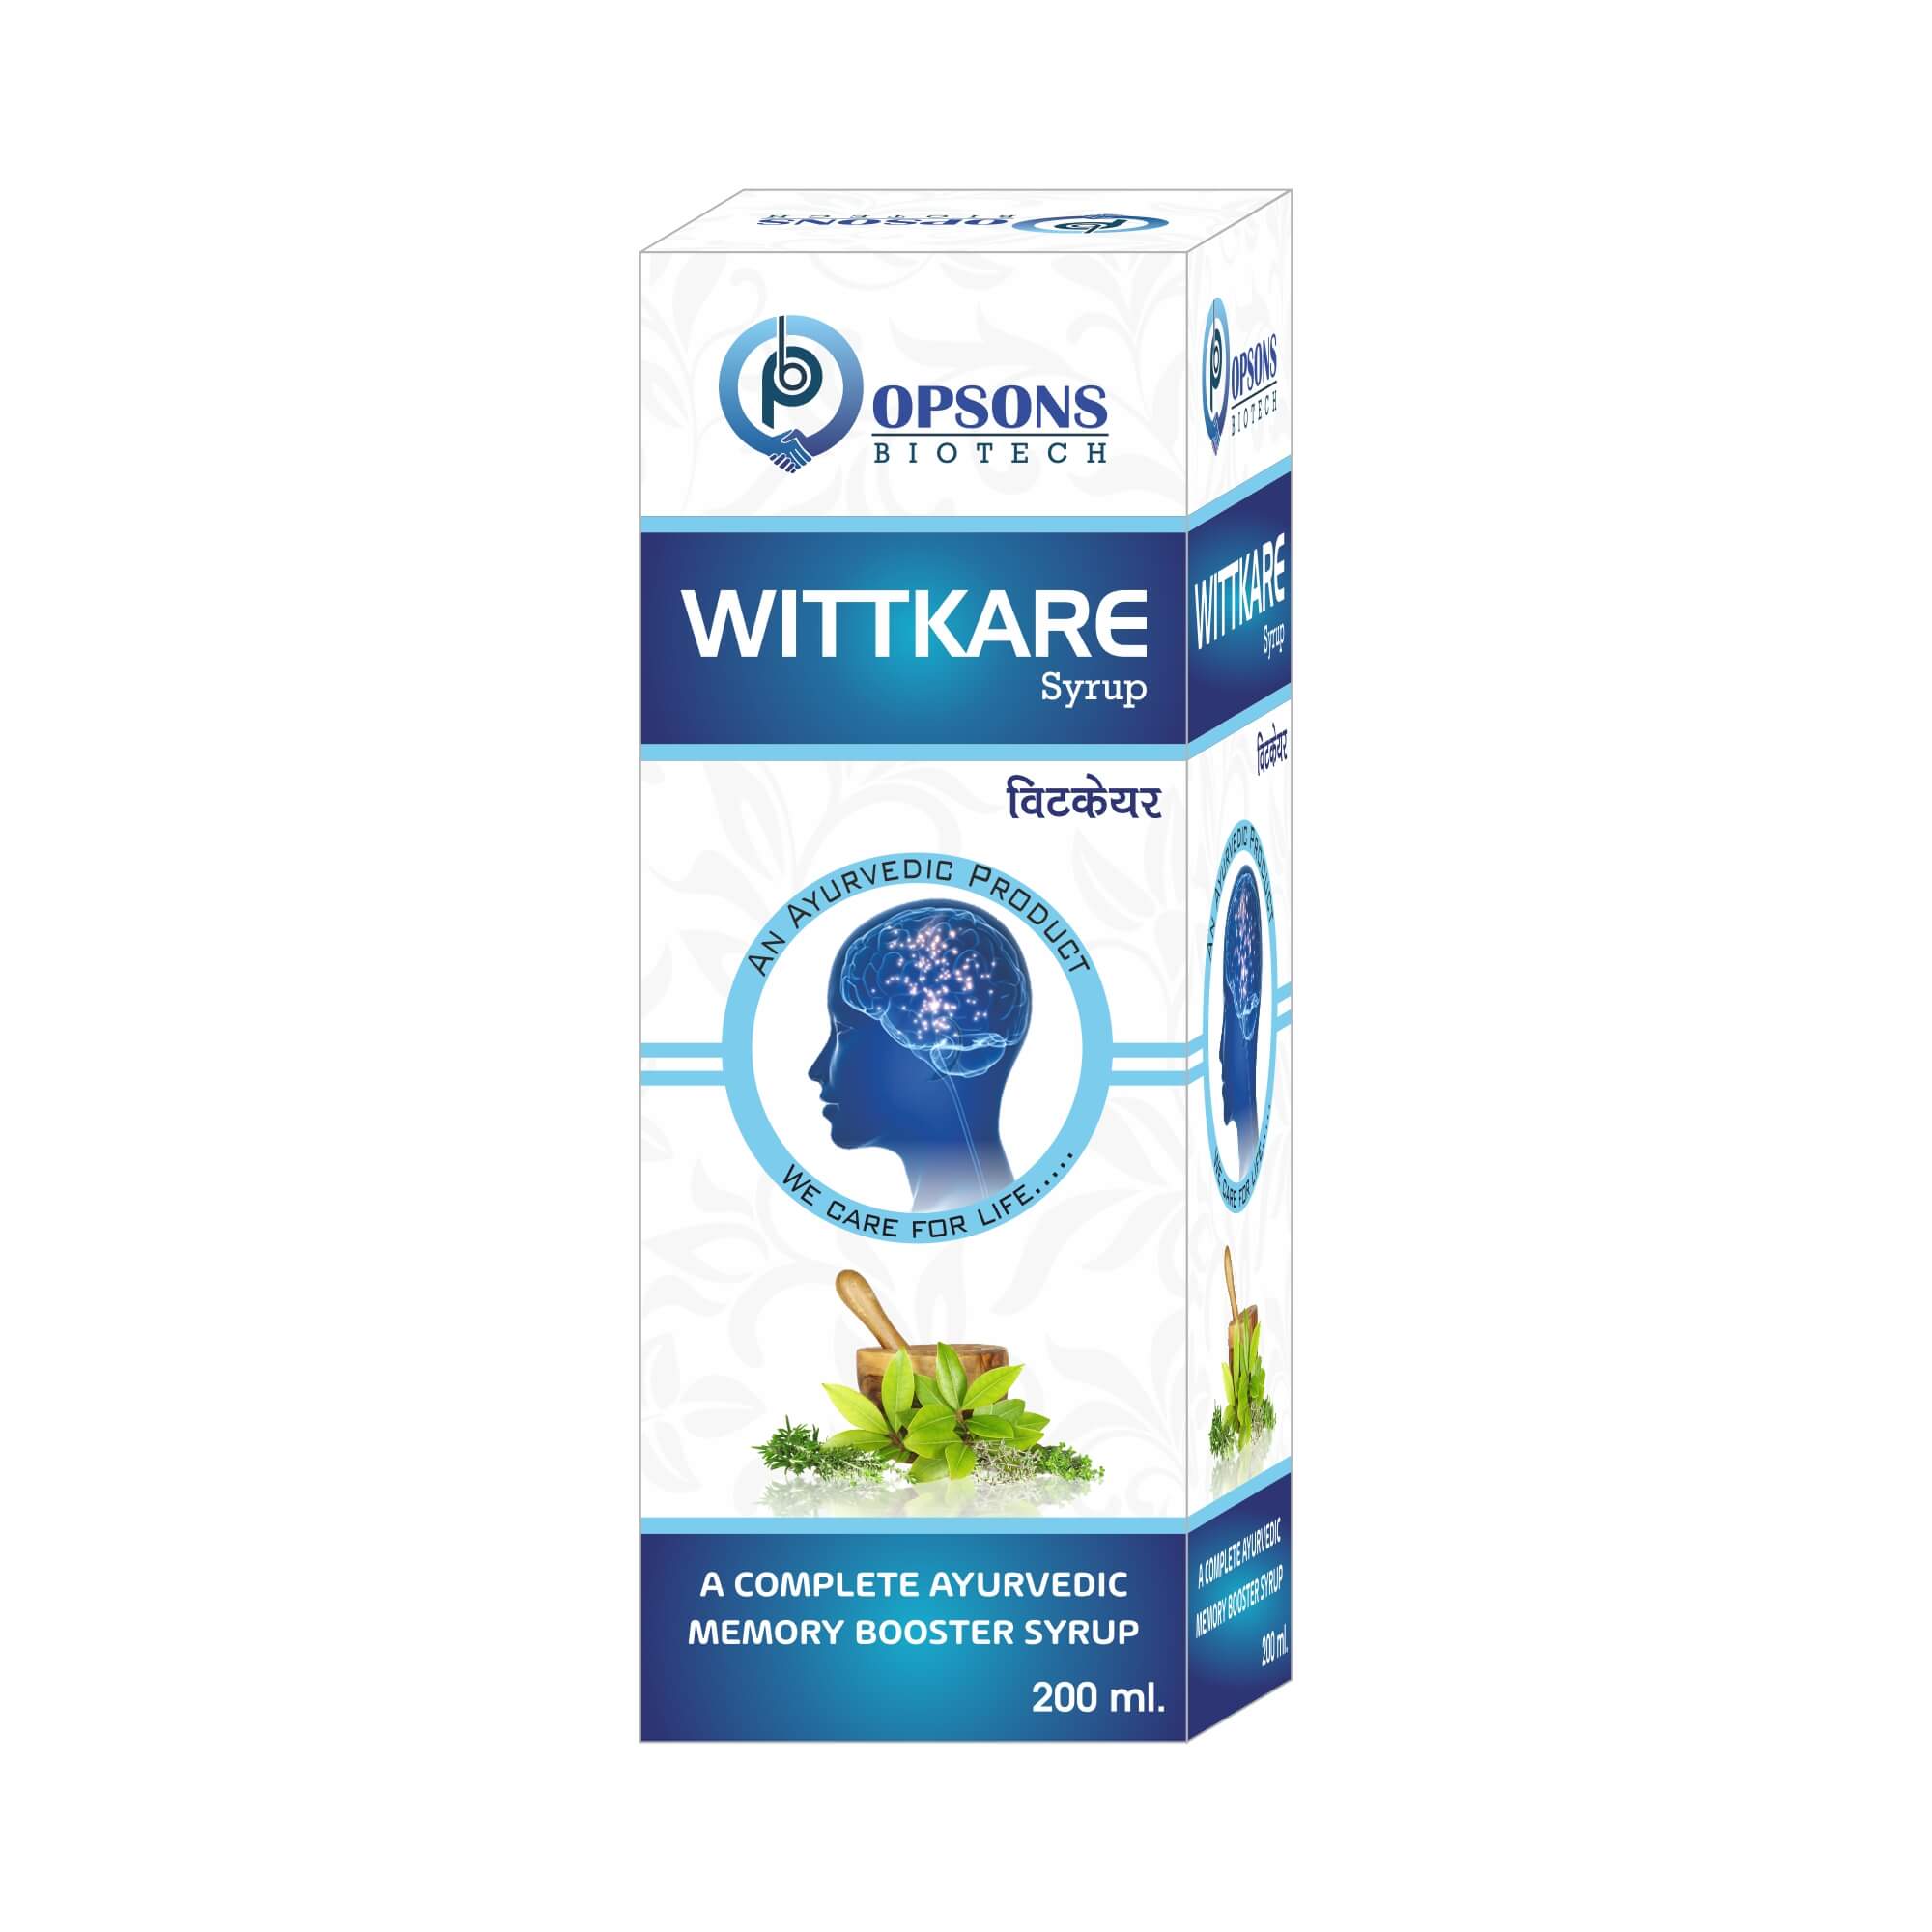 Product Name: Wittkare, Compositions of Wittkare are A Complete Ayurvedic Memory Booster Syrup - Opsons Biotech